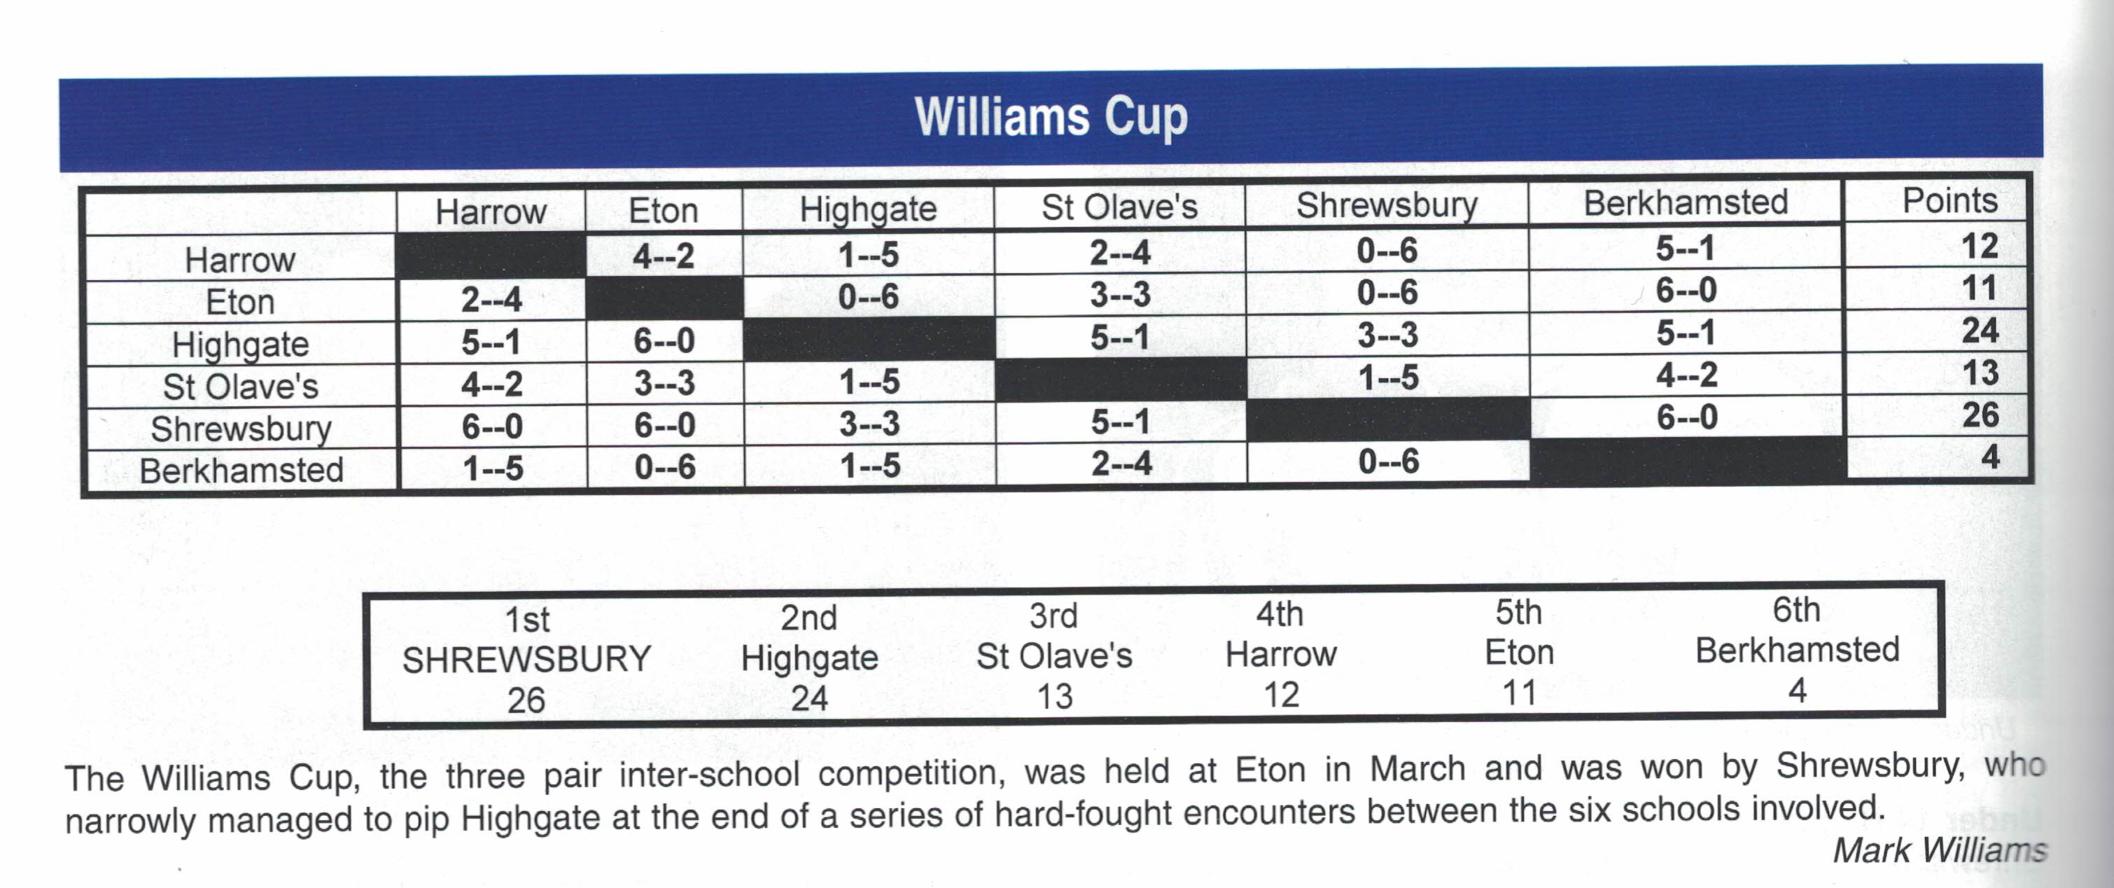 williams cup 2010